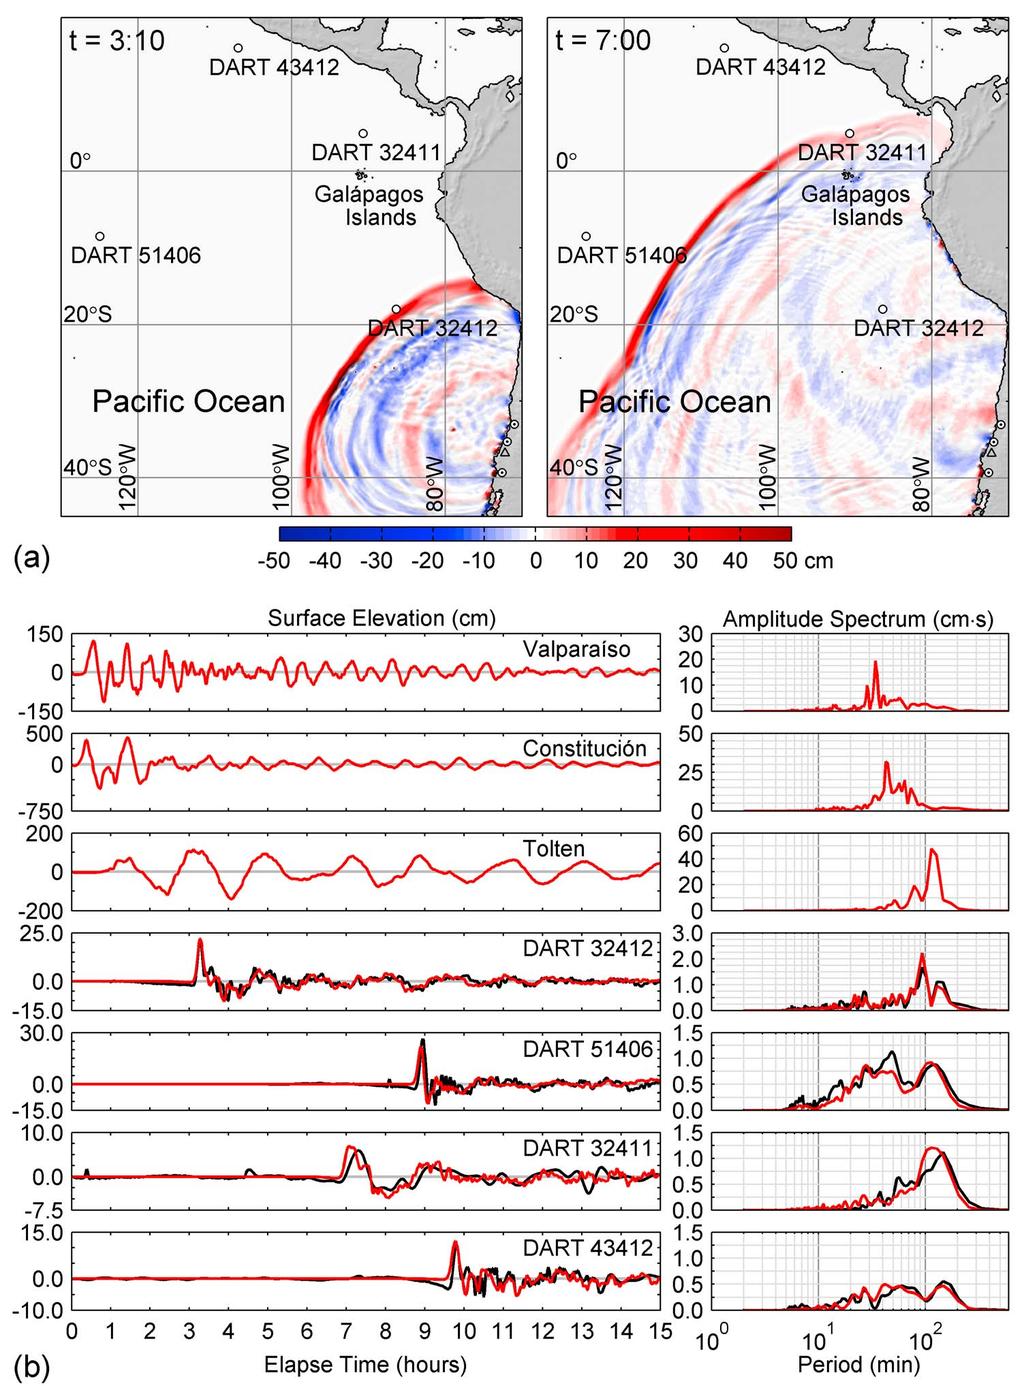 Figure 2. Propagation of the 2010 Chile tsunami. (a) Snapshots of surface elevation. Triangle indicates Talcahuano and circle dots indicate Valparaíso, Constituión, and Tolten from north to south.